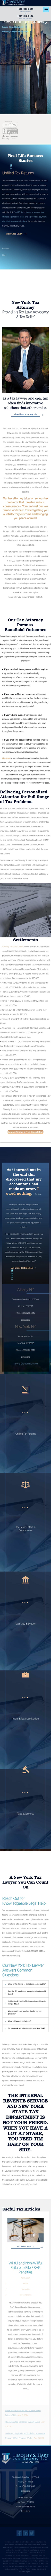 Timothy S. Hart, Tax Attorney and CPA - New York NY Lawyers